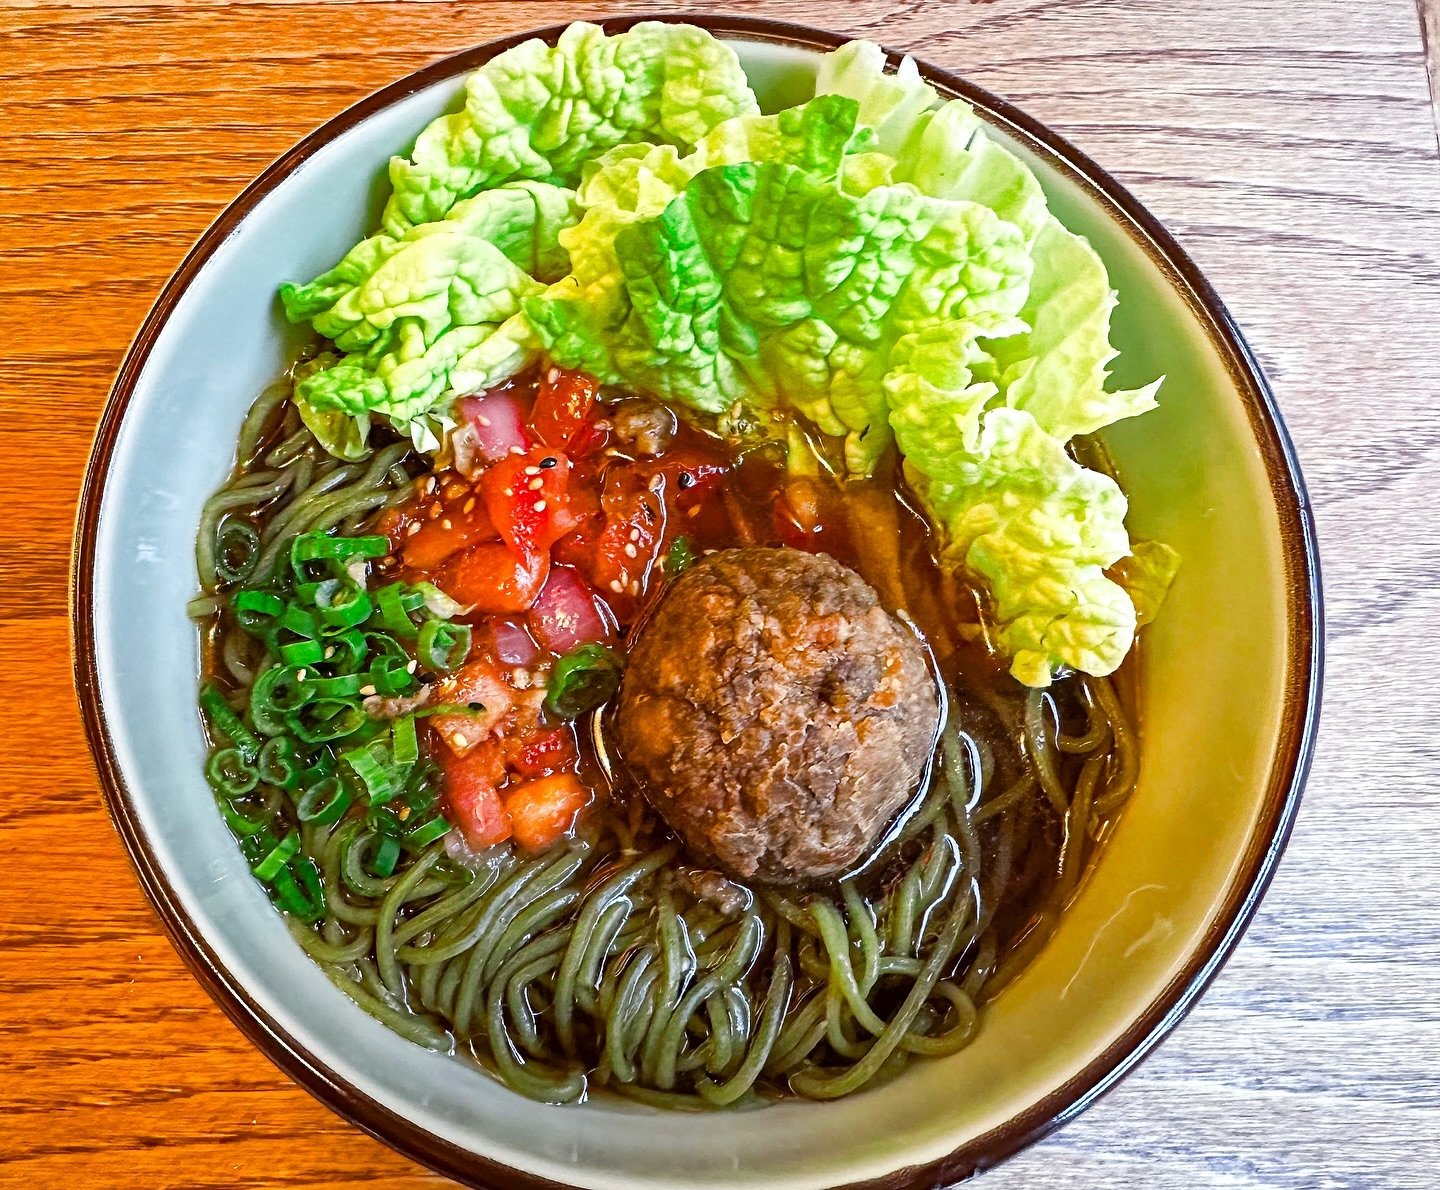 It&rsquo;s Meatless Monday! 🥬
Indulge in the NEW, delicious, and nutritious Cloudy Vegan Ramen featuring a savory Shoyu broth, Shiitake plant-based meatball, crisp Napa cabbage, fresh scallions, house-made tomato giardiniera, a hint of truffle oil, 